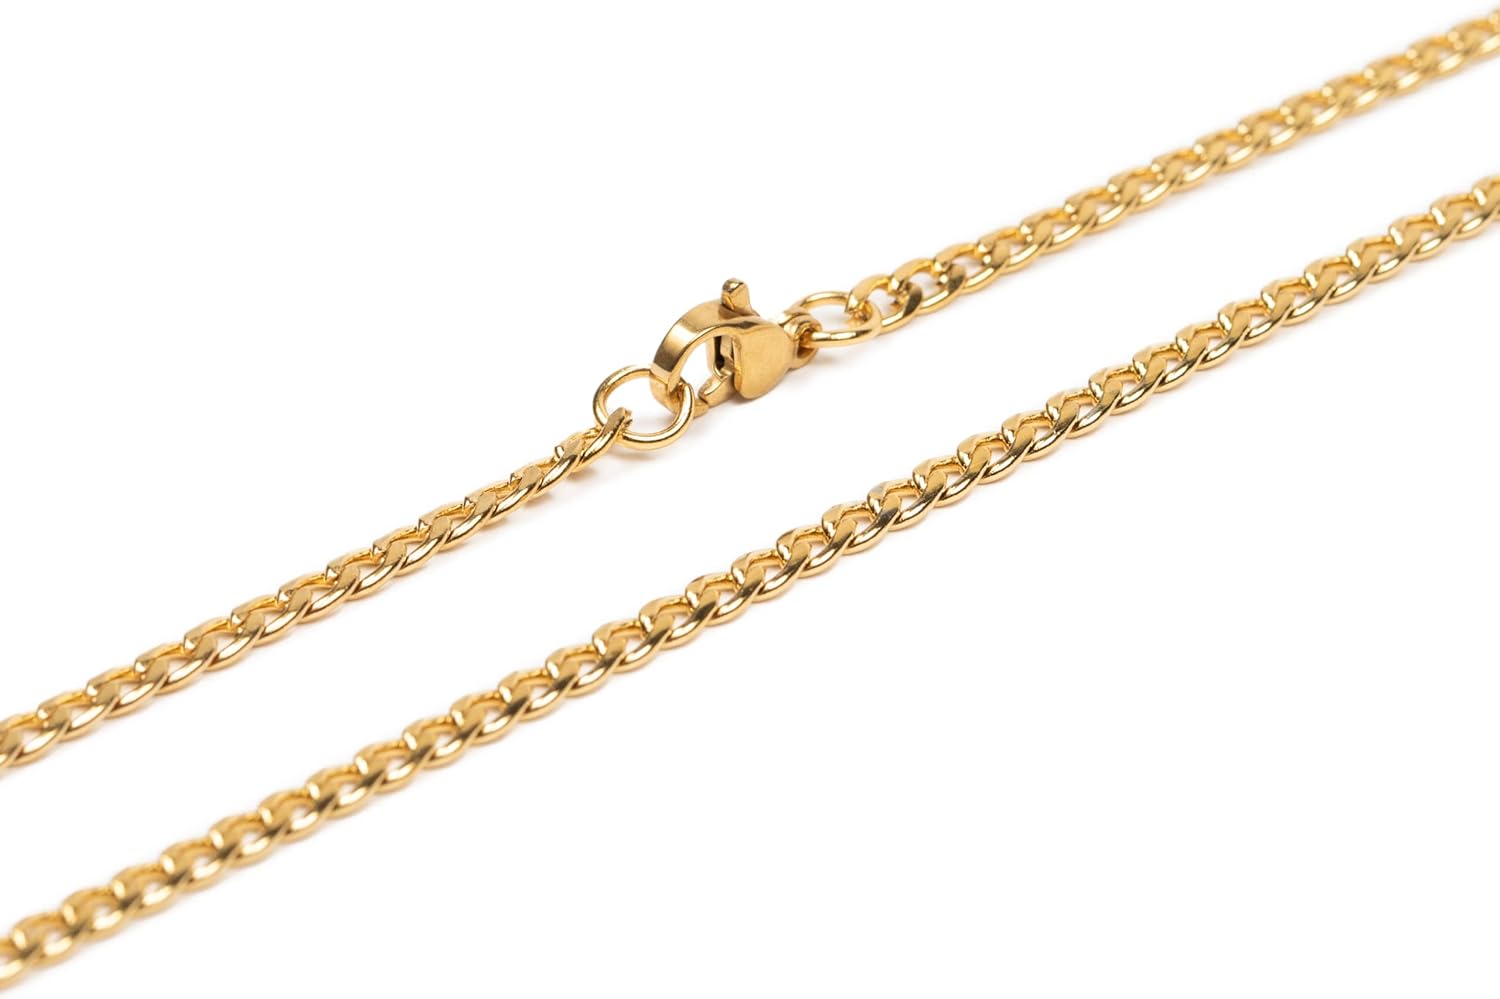 3mm Cuban Link Necklace, 22” Length. Hypoallergenic Stainless Steel with Real Gold PVD Coating